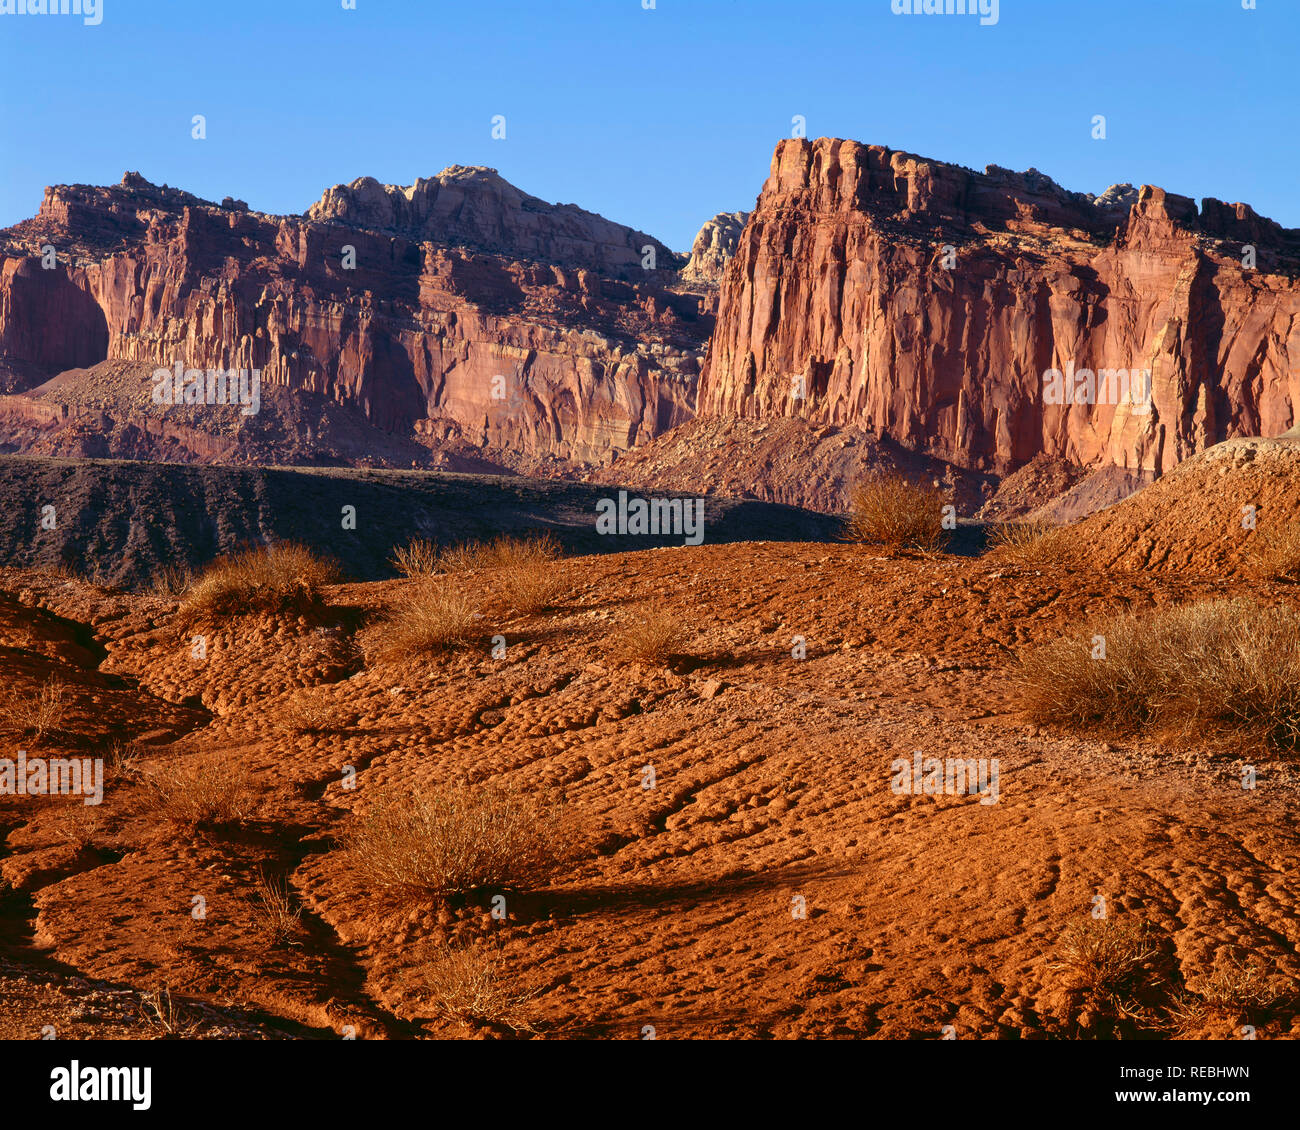 USA, Utah, Capitol Reef National Park, Evening view northeast towards the western face of the Waterpocket Fold. Stock Photo